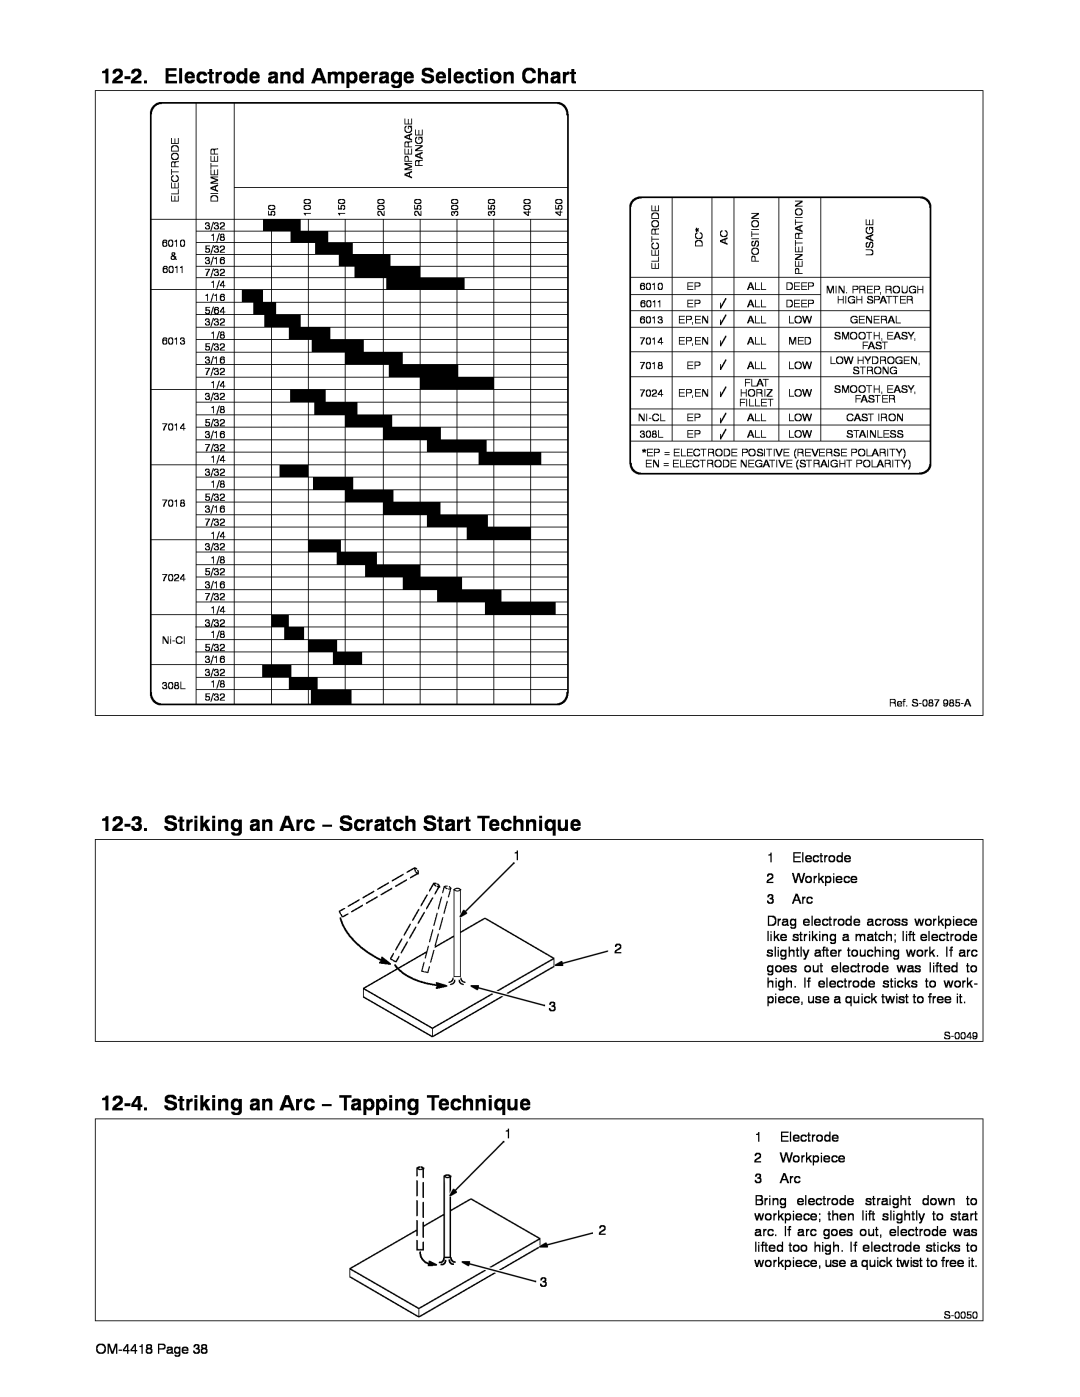 Hobart Welding Products 4500 manual Electrode and Amperage Selection Chart, Striking an Arc − Scratch Start Technique 